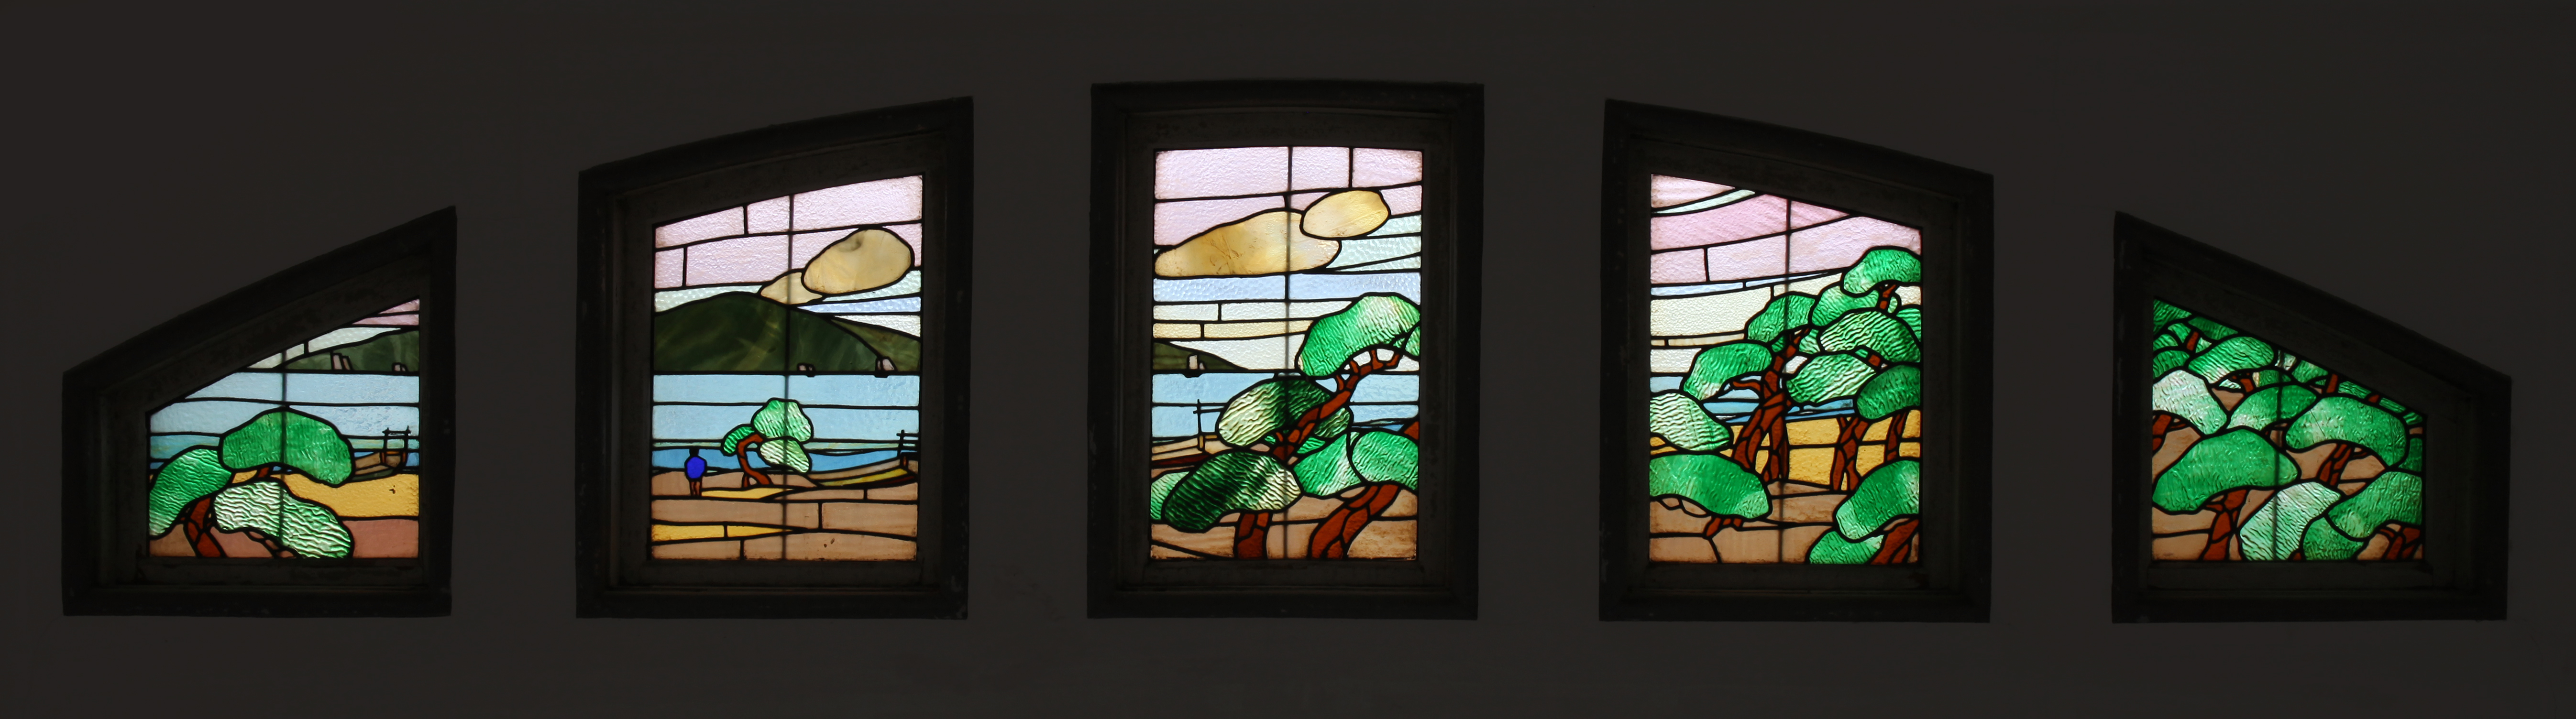 Stained-glass windows depicting magnificent landscape